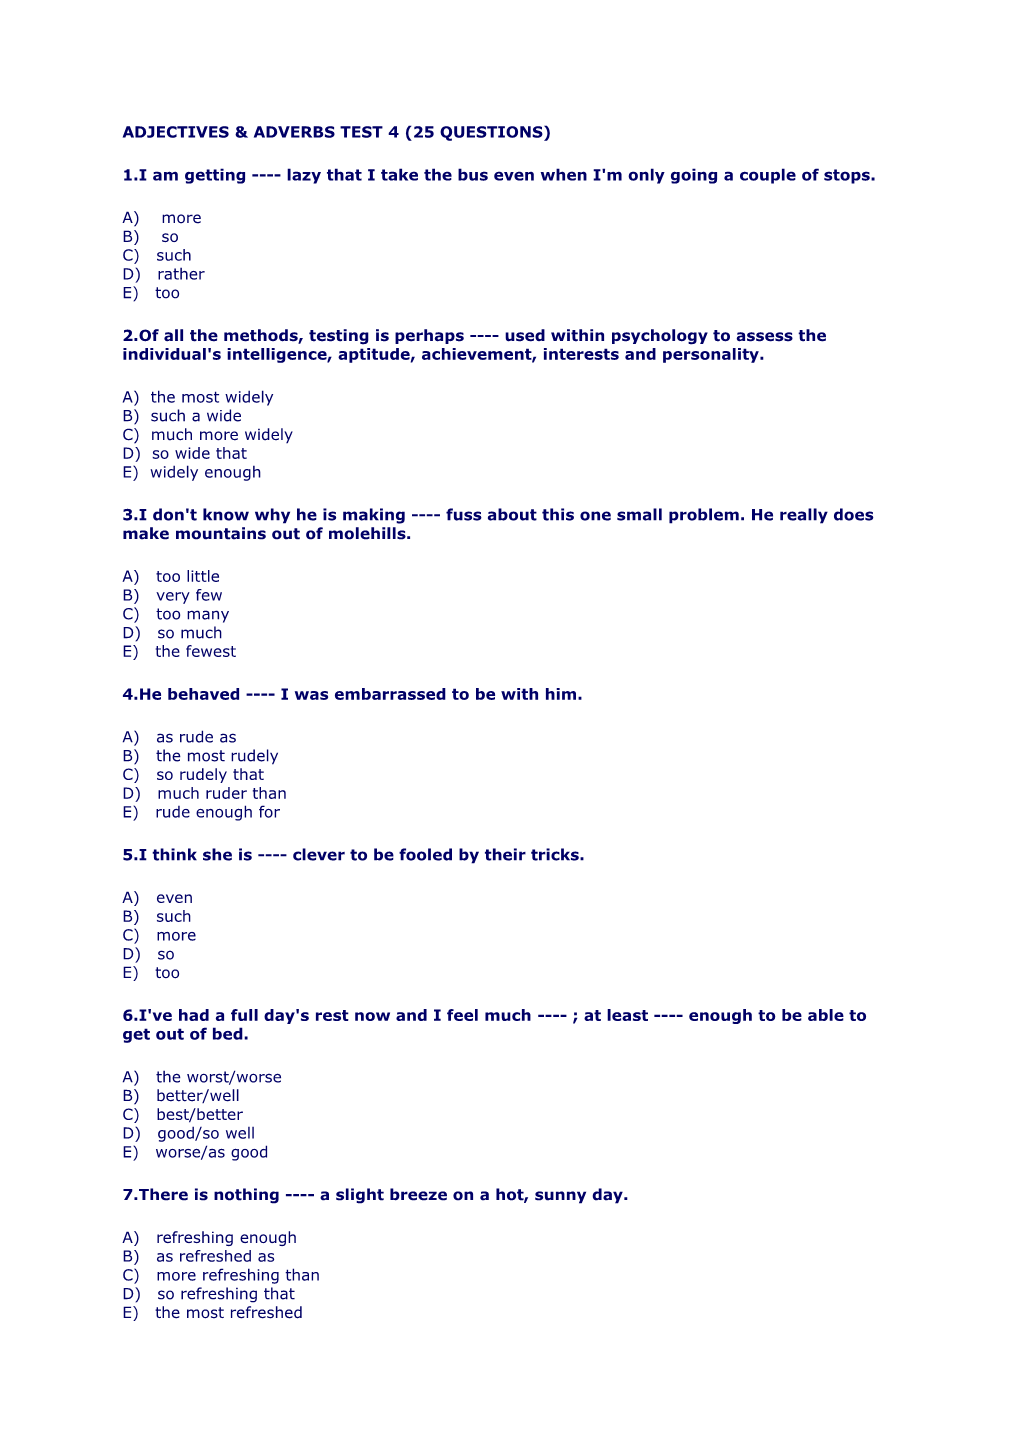 Adjectives & Adverbs Test 4 (25 Questions)